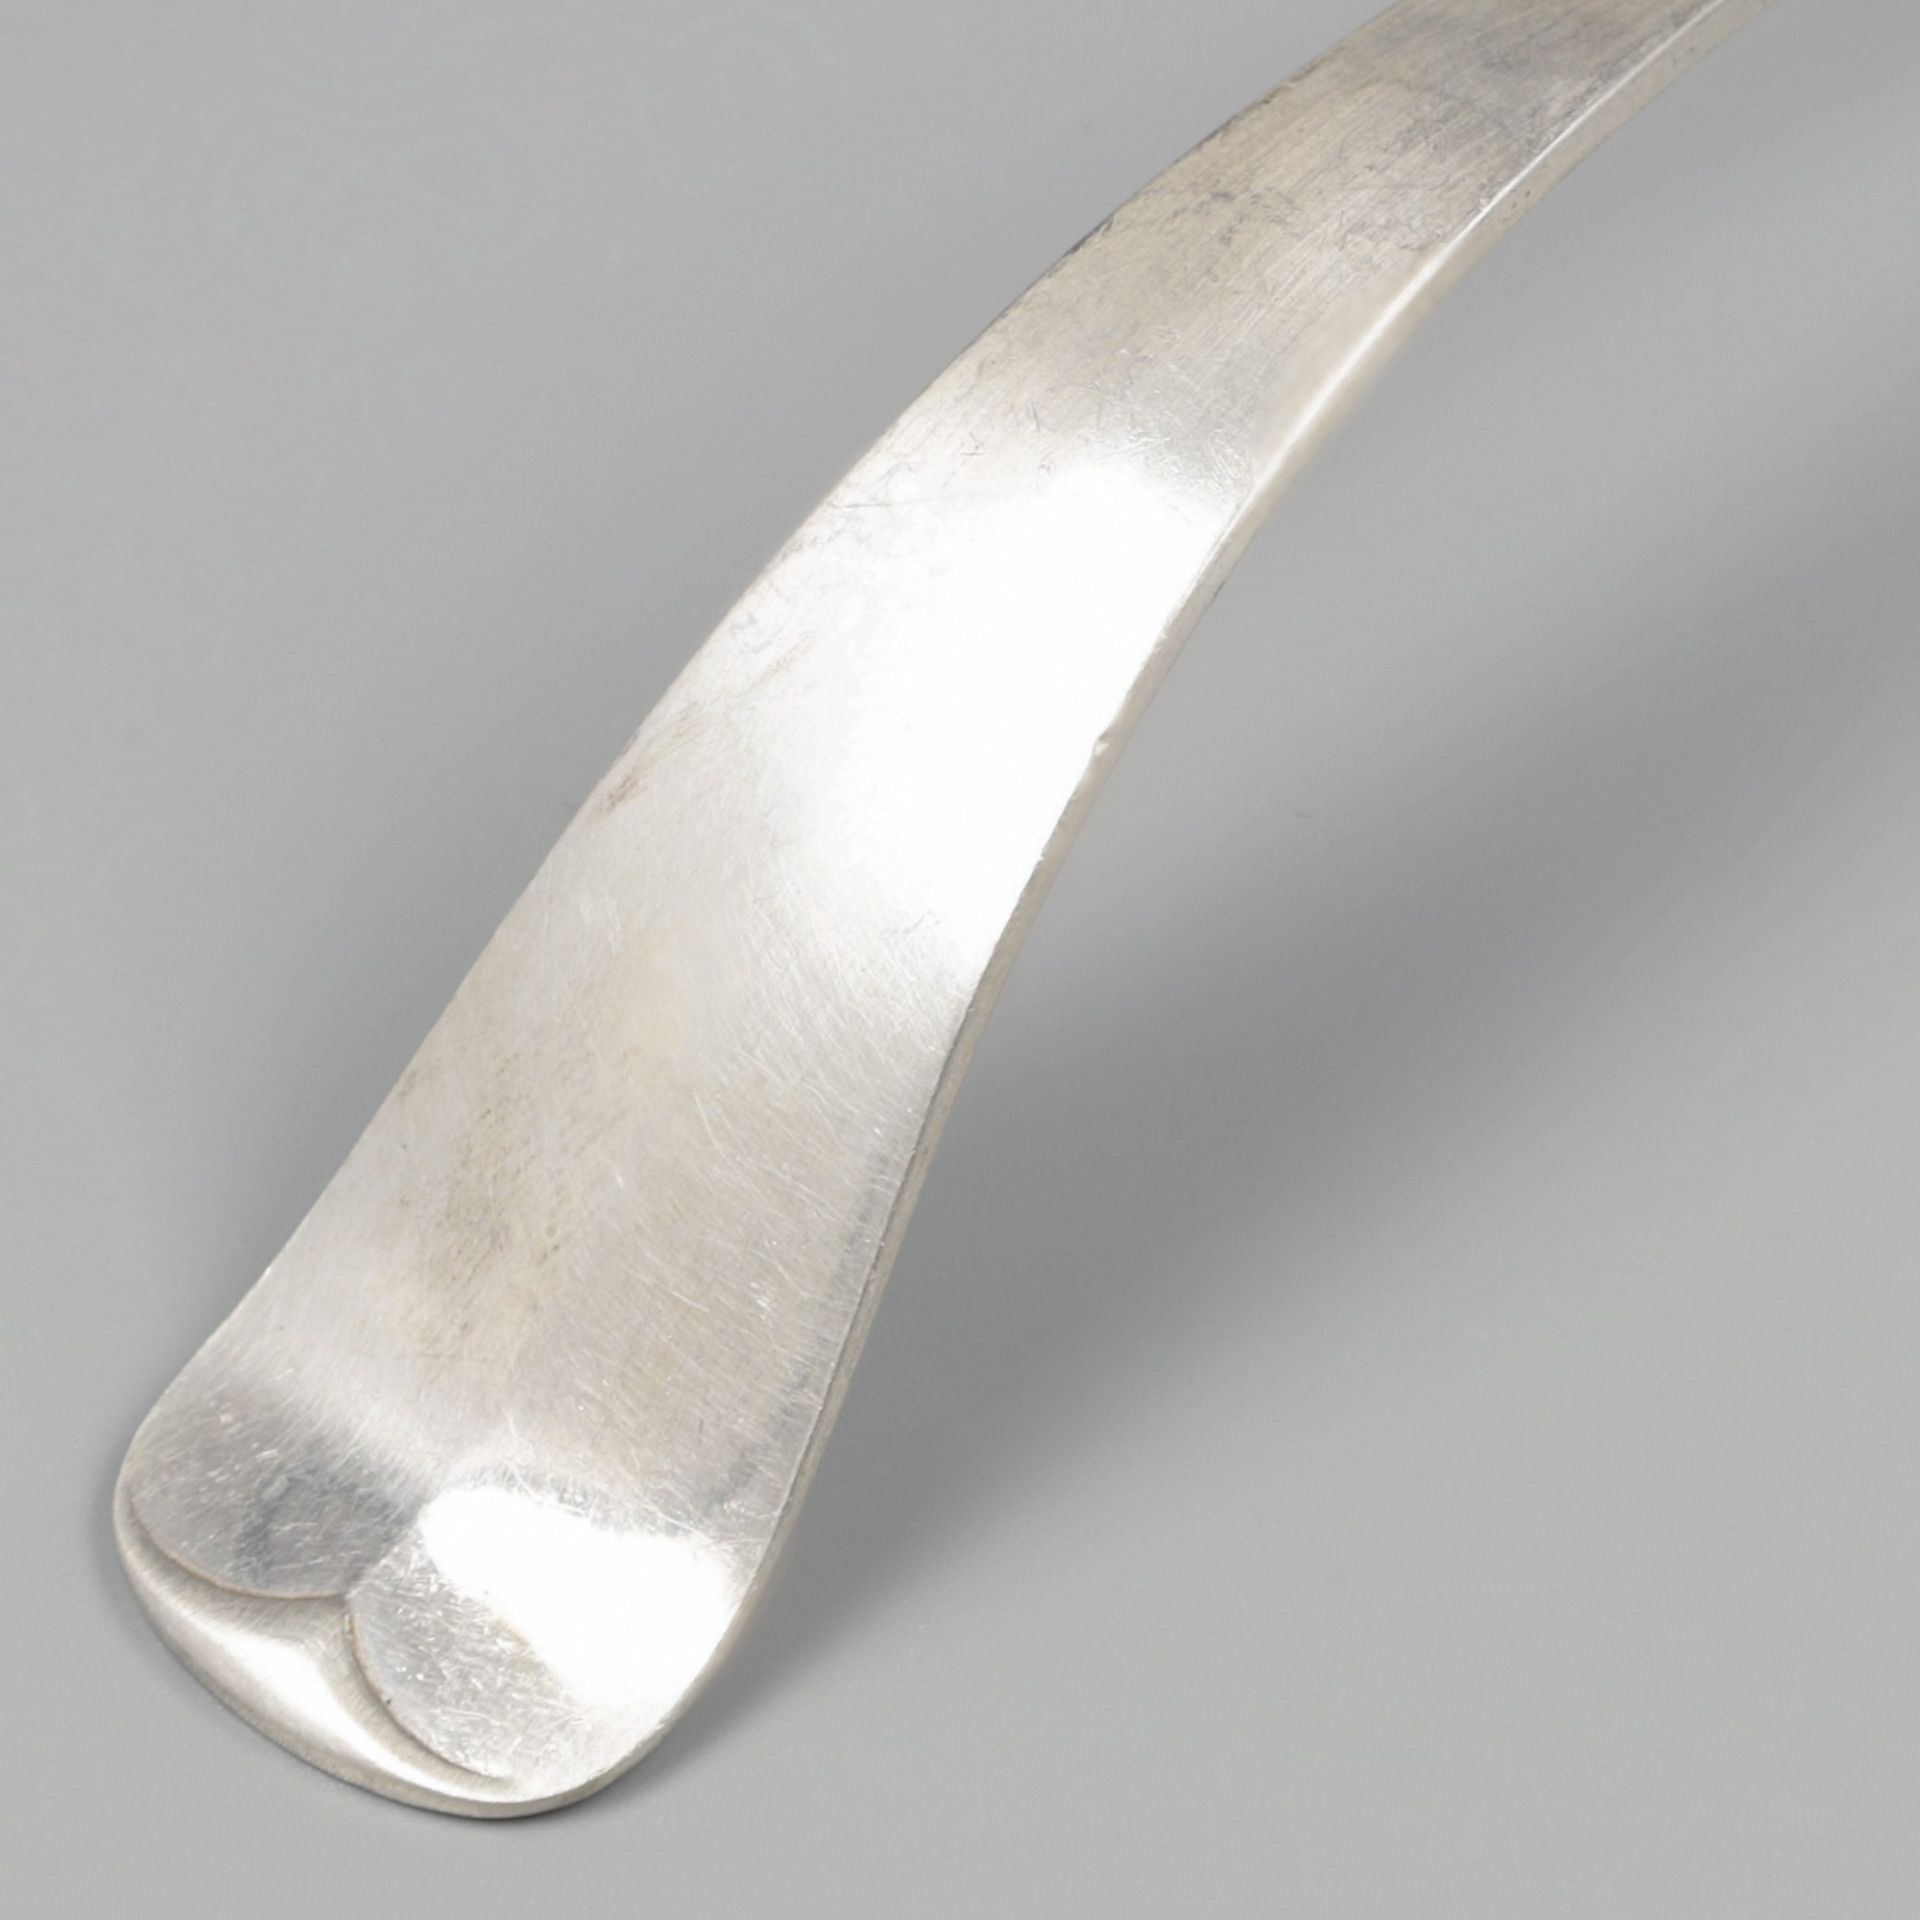 No reserve - Sauce serving spoon "Haags Lofje" silver. - Image 4 of 5